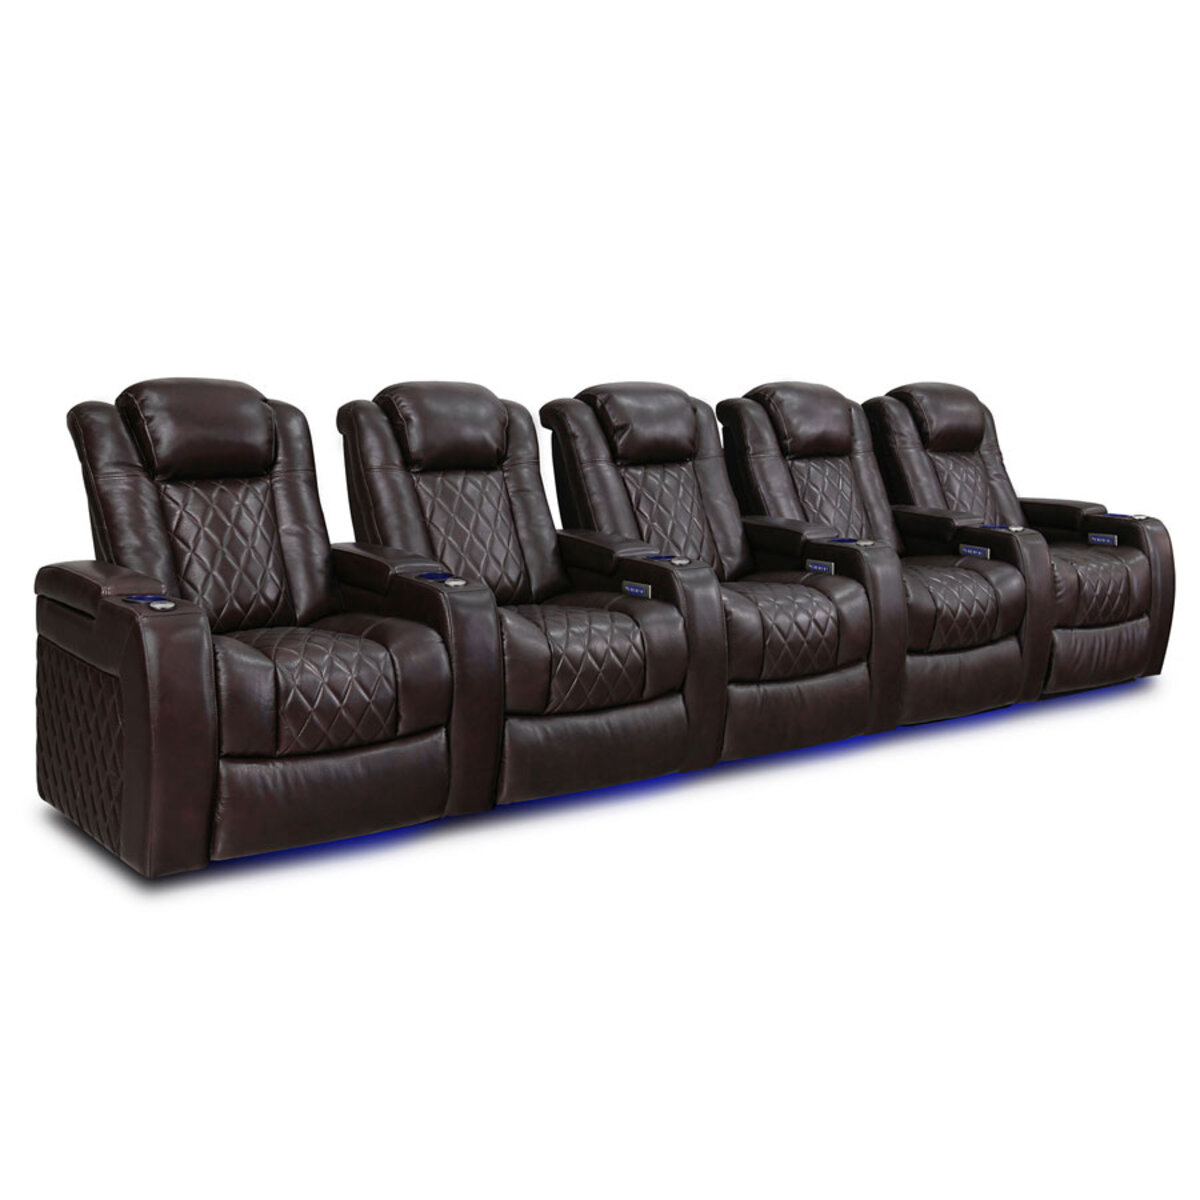 Valencia Home Theatre Seating Tuscany Row of 5 Chairs, Brown